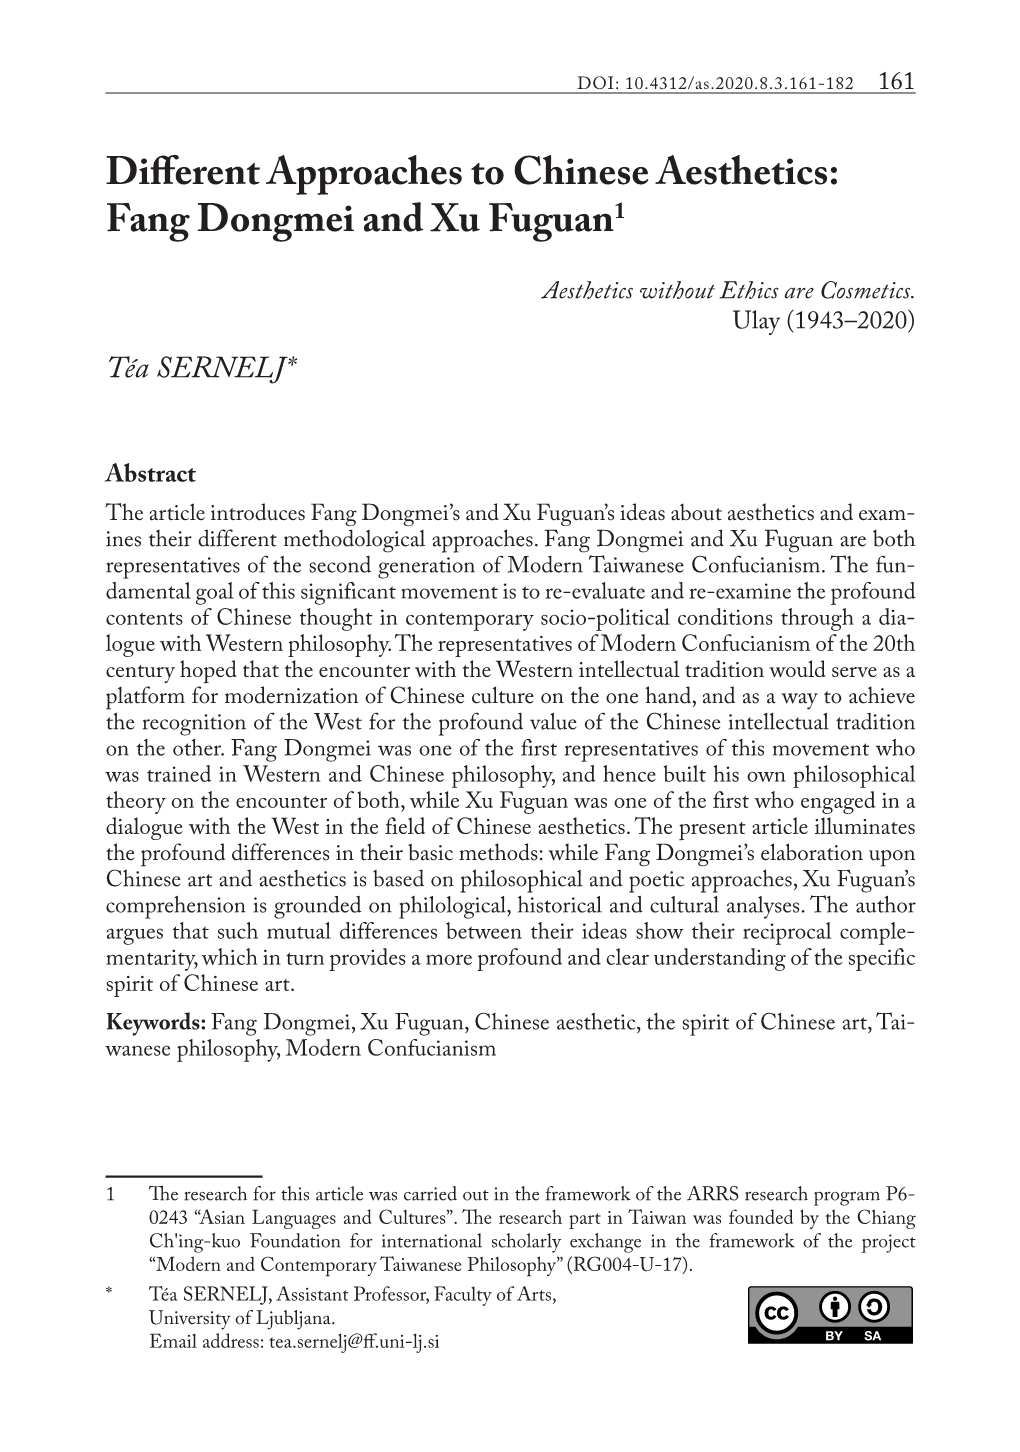 Different Approaches to Chinese Aesthetics: Fang Dongmei and Xu Fuguan1